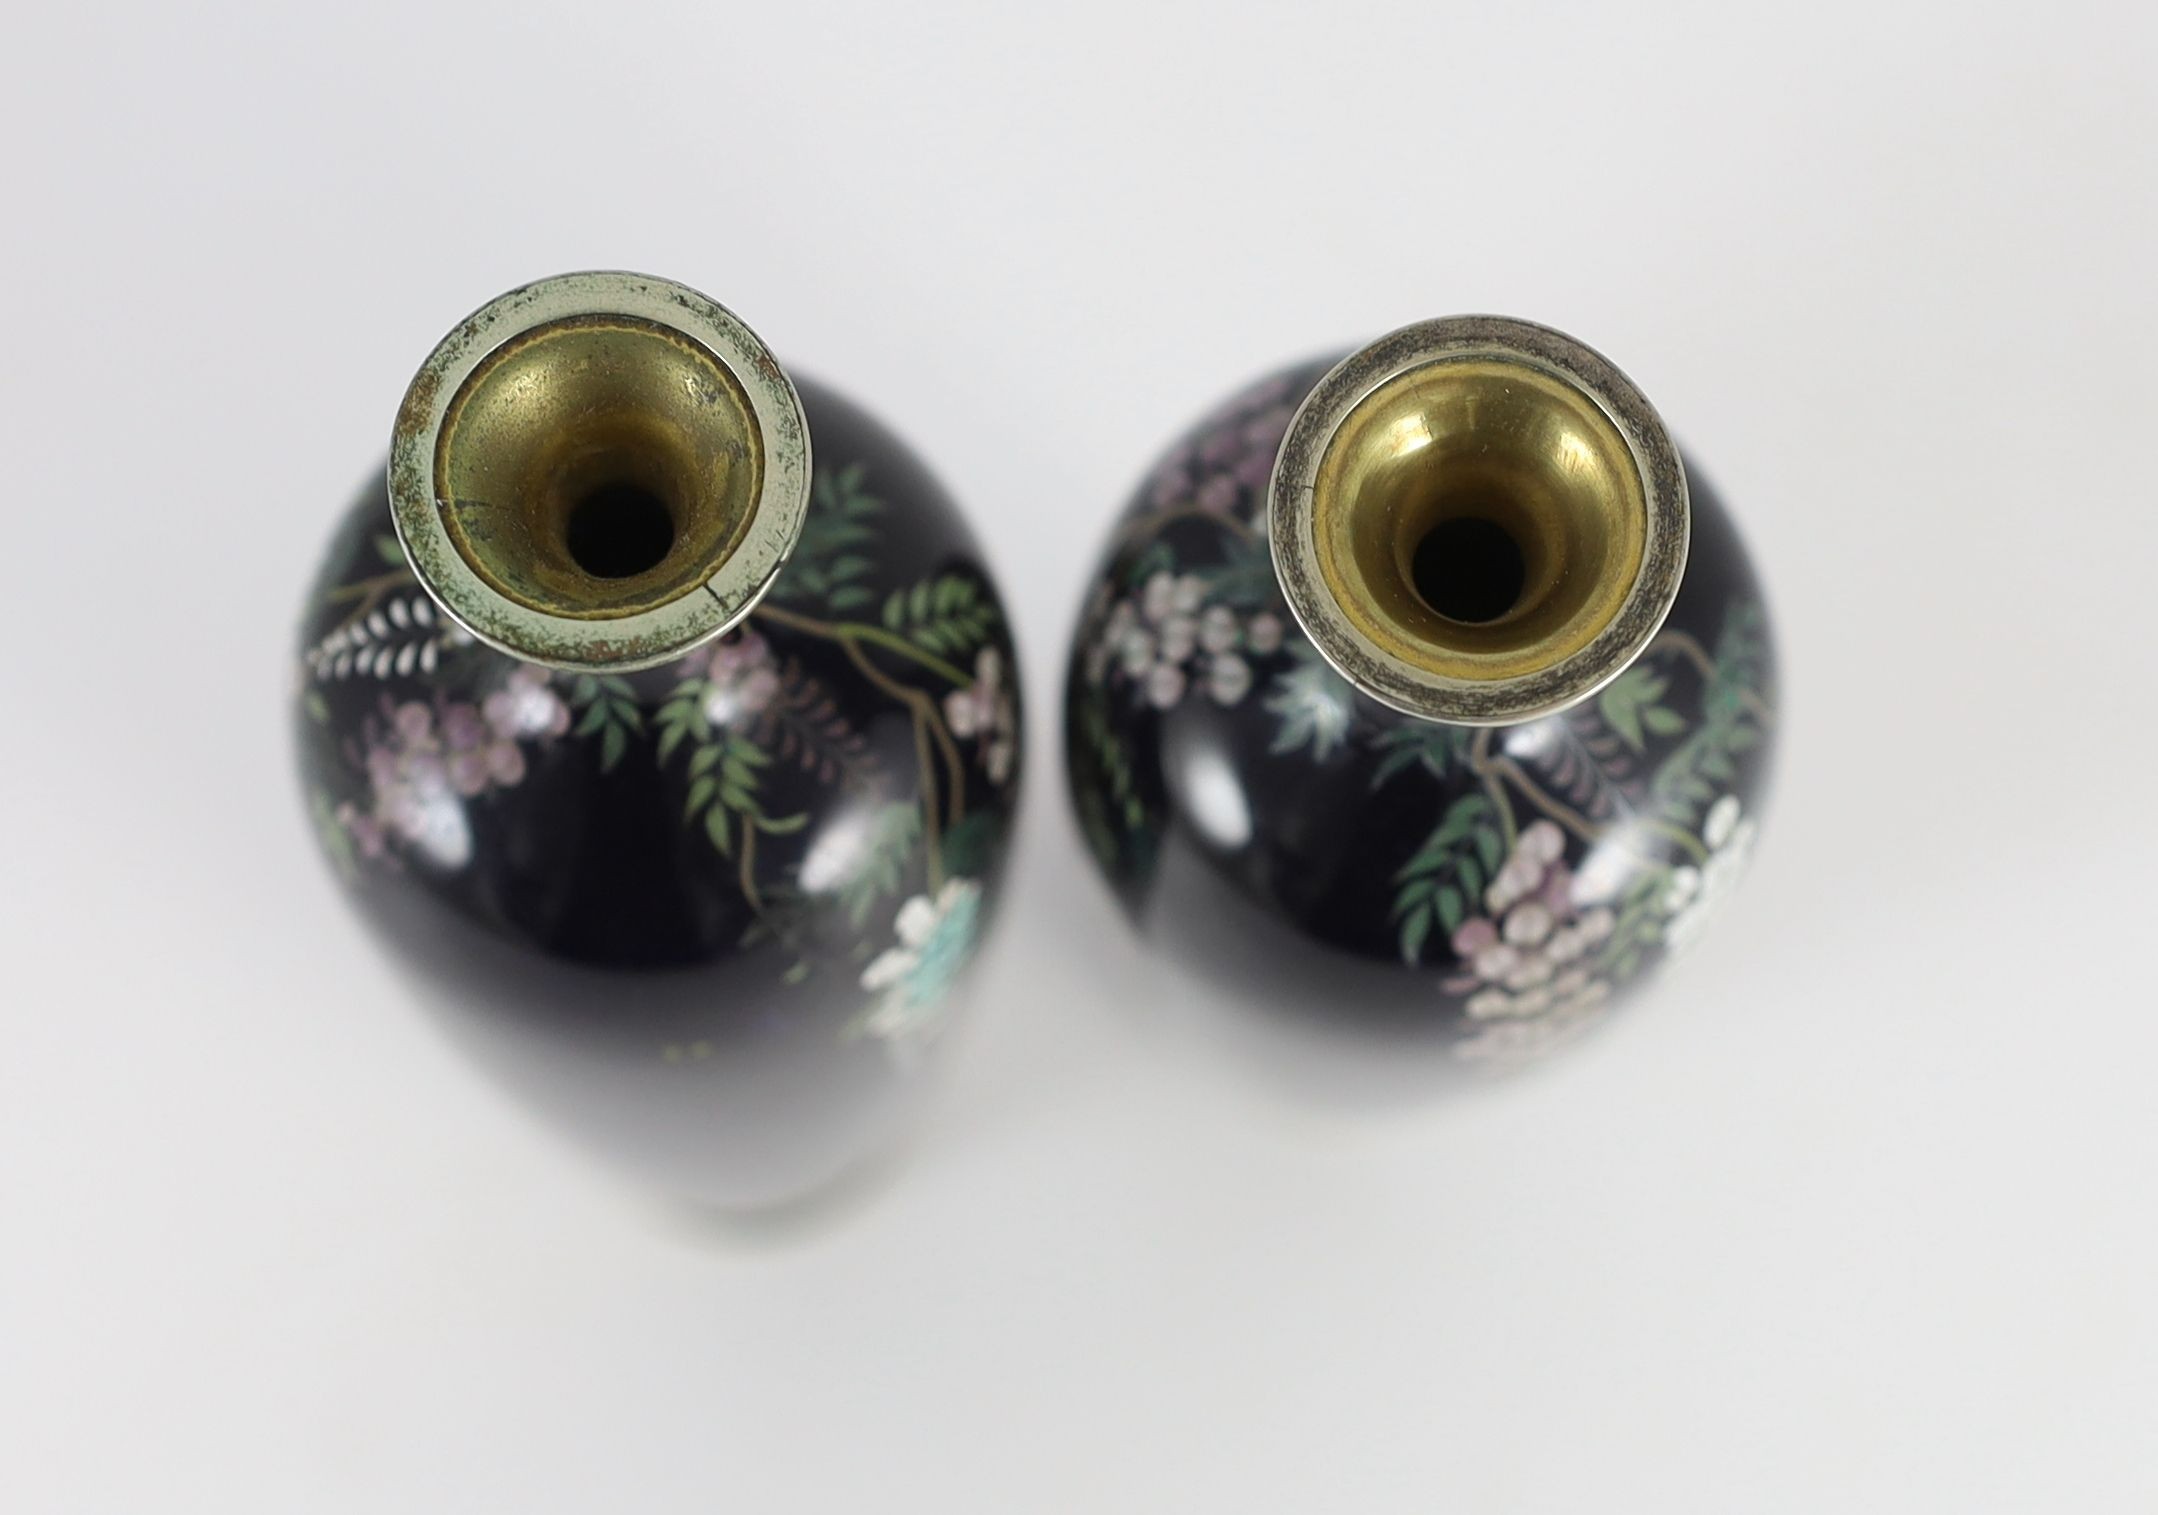 A pair of fine Japanese cloisonné enamel vases, by Inaba Nanaho Studio, Kyoto, Meiji Period, 15.3 cm high